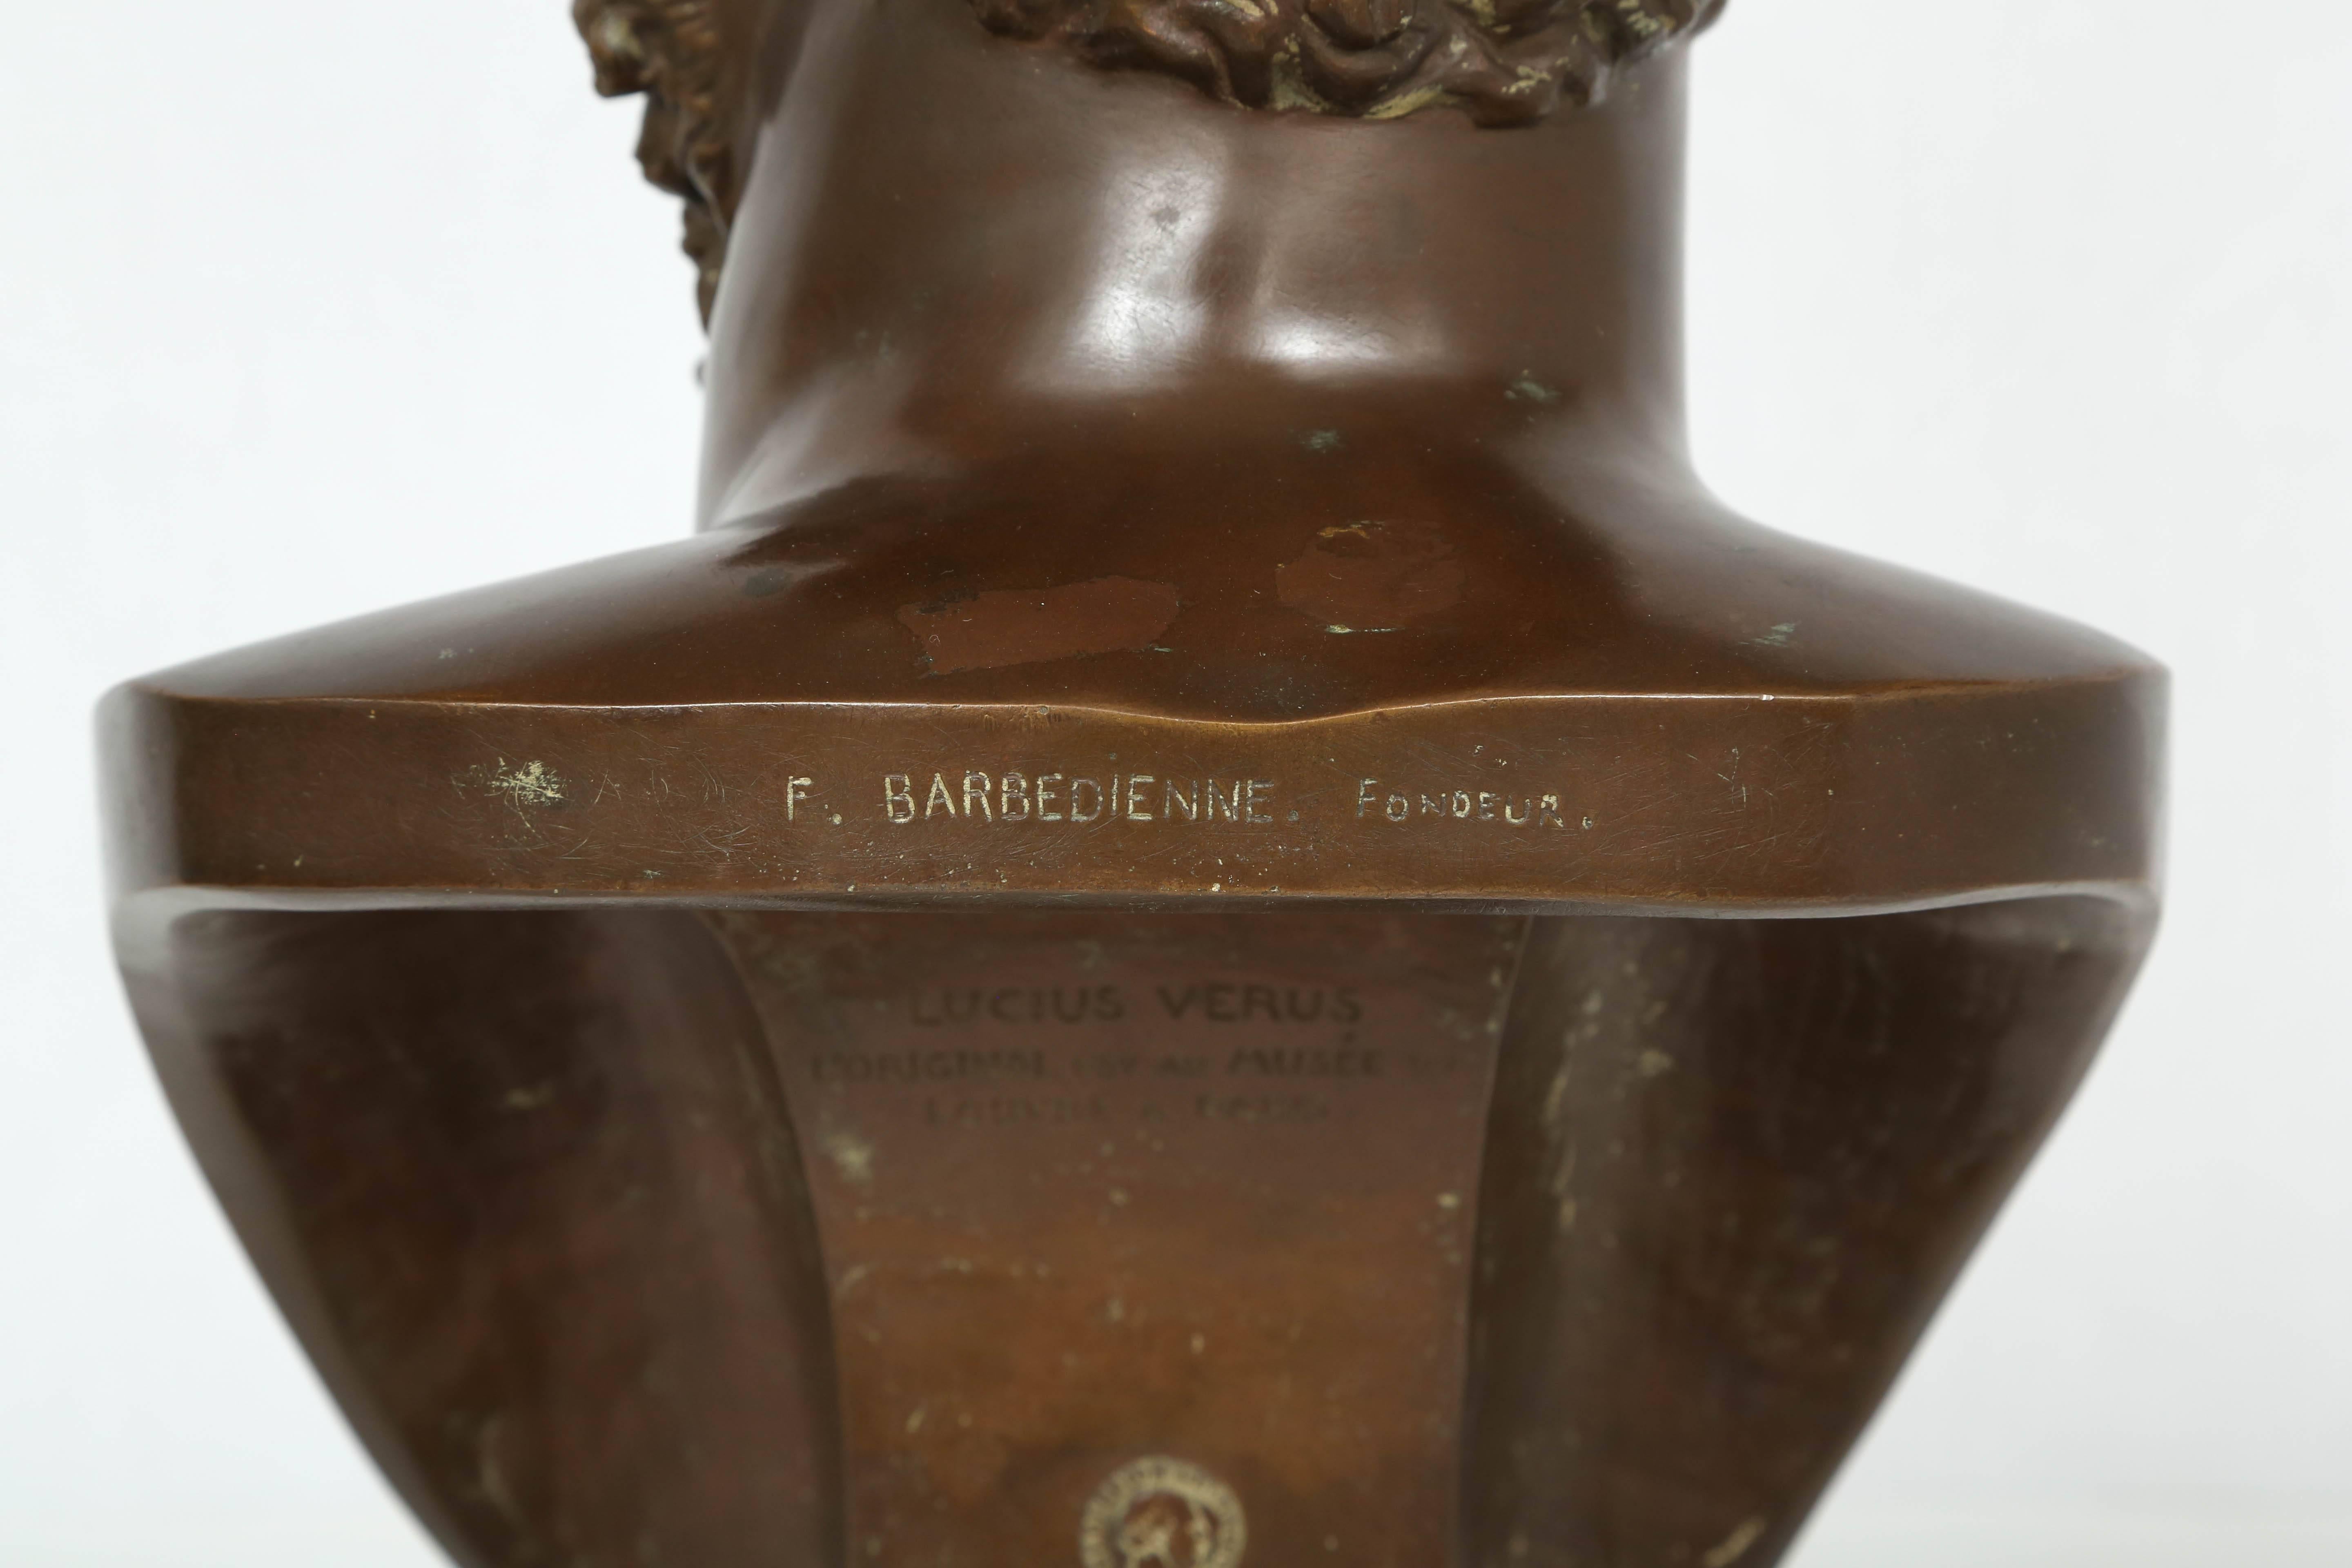 Cast 19th Century, Italian Bronze Bust of Lucius Verus by F. Barbadienne Foundry